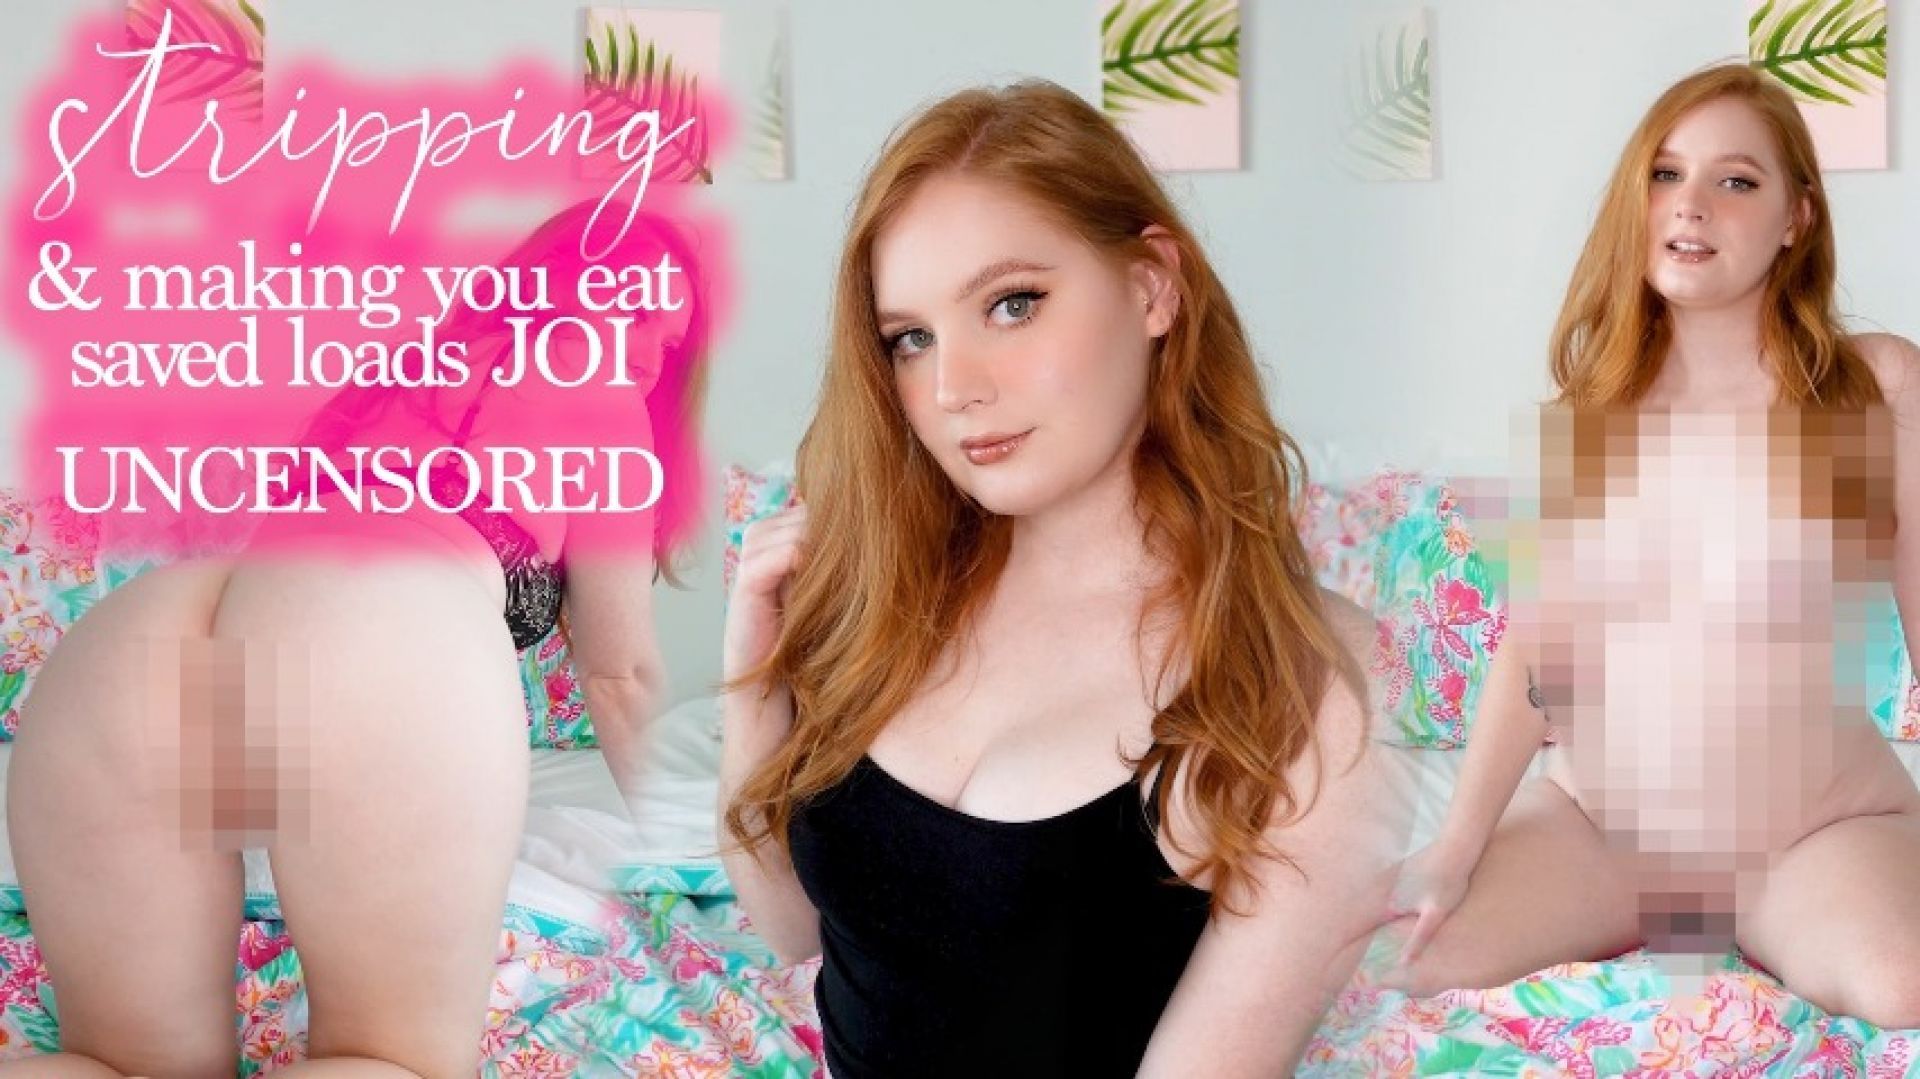 Stripping &amp; Making You Eat Saved Loads JOI UNCENSORED